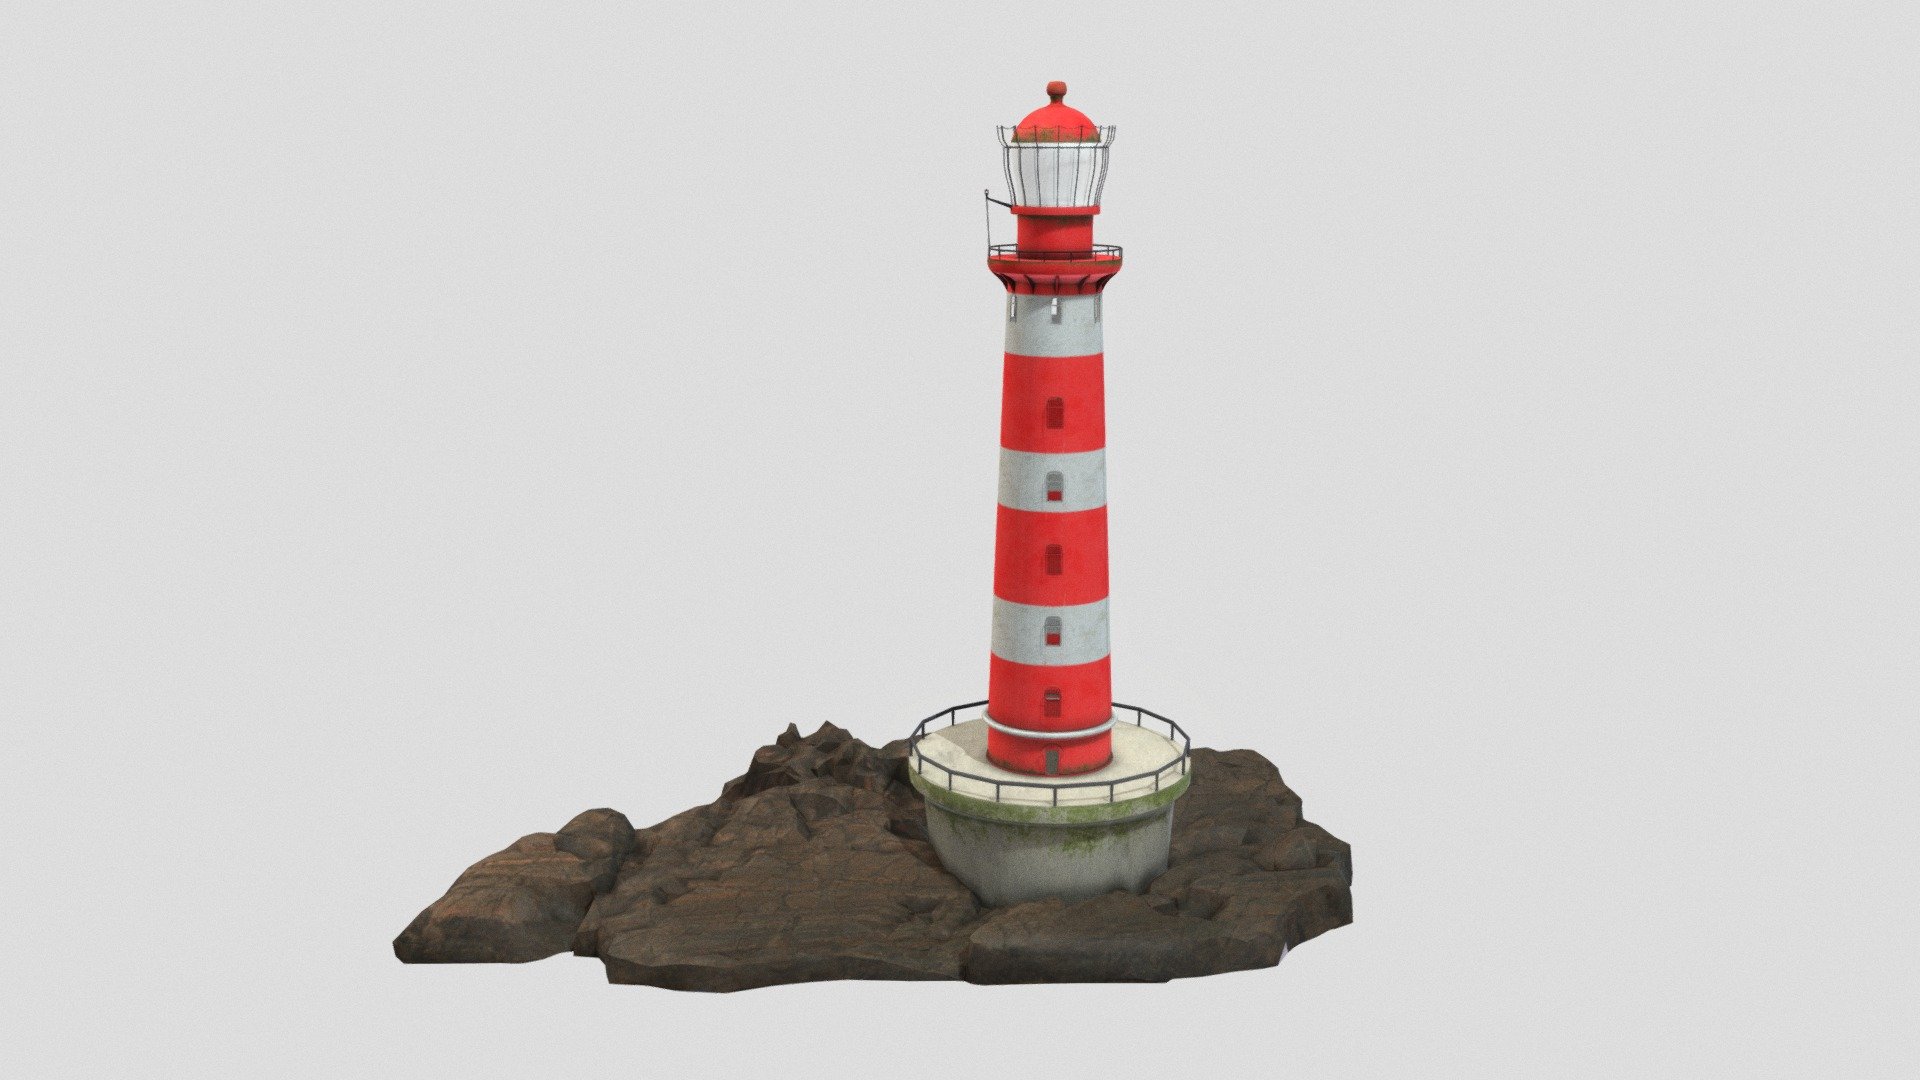 It's a light house. Made to be used in games. 1024x1024 texture size. Enjoy 3d model